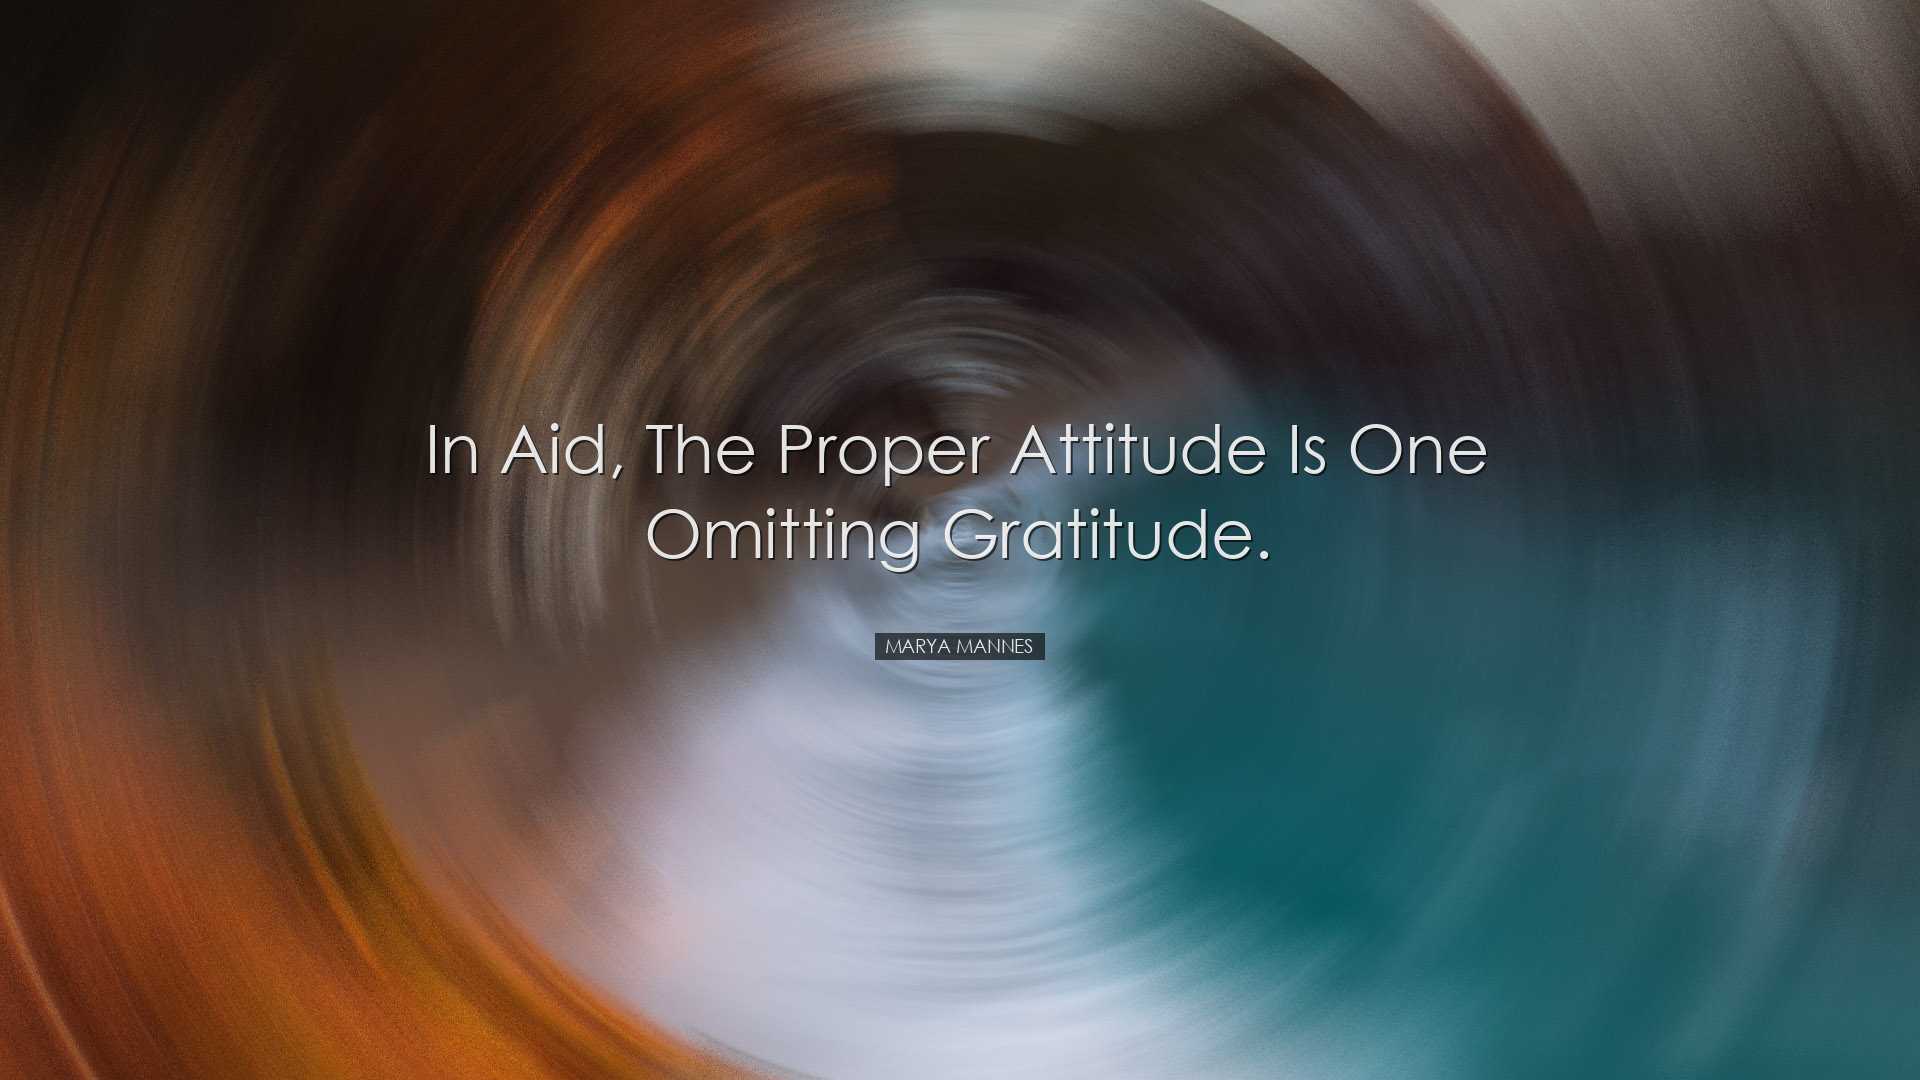 In aid, the proper attitude is one omitting gratitude. - Marya Man